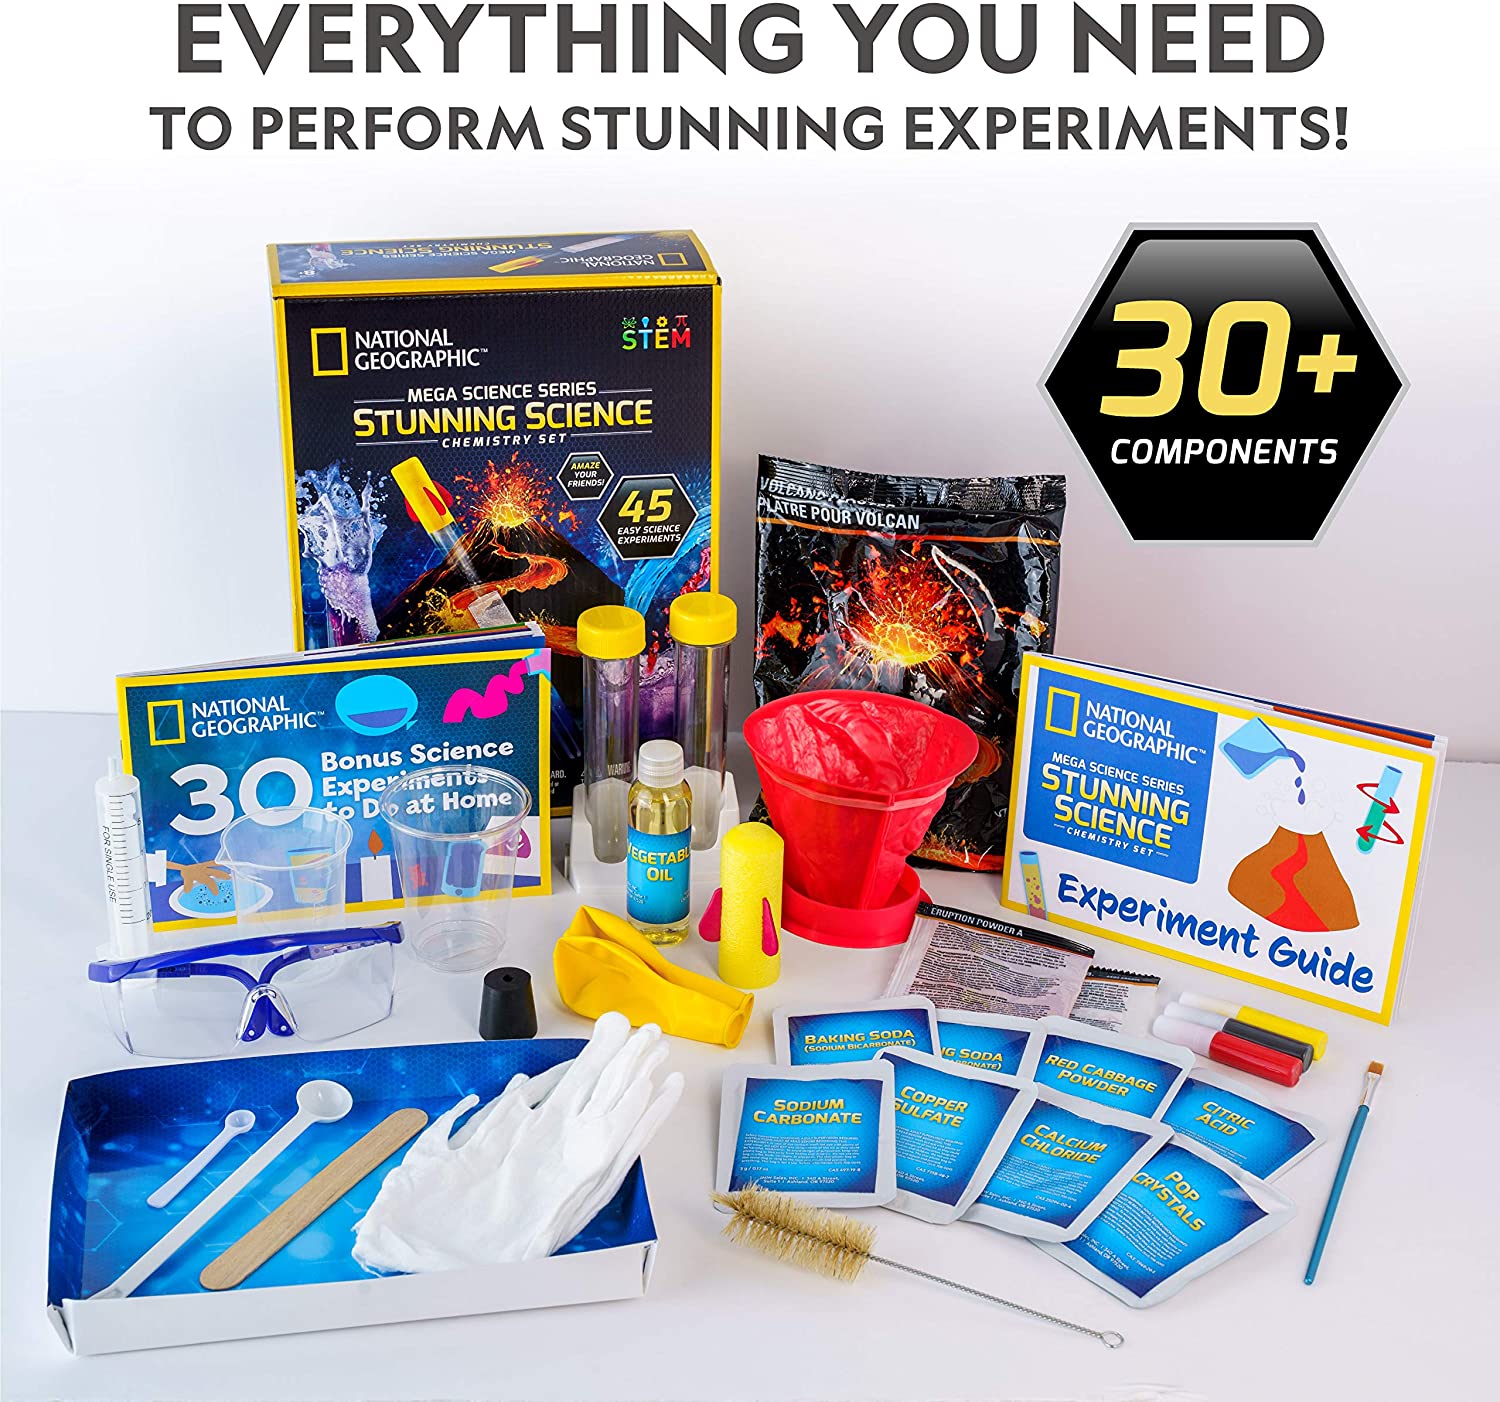 NATIONAL GEOGRAPHIC Earth Science Kit